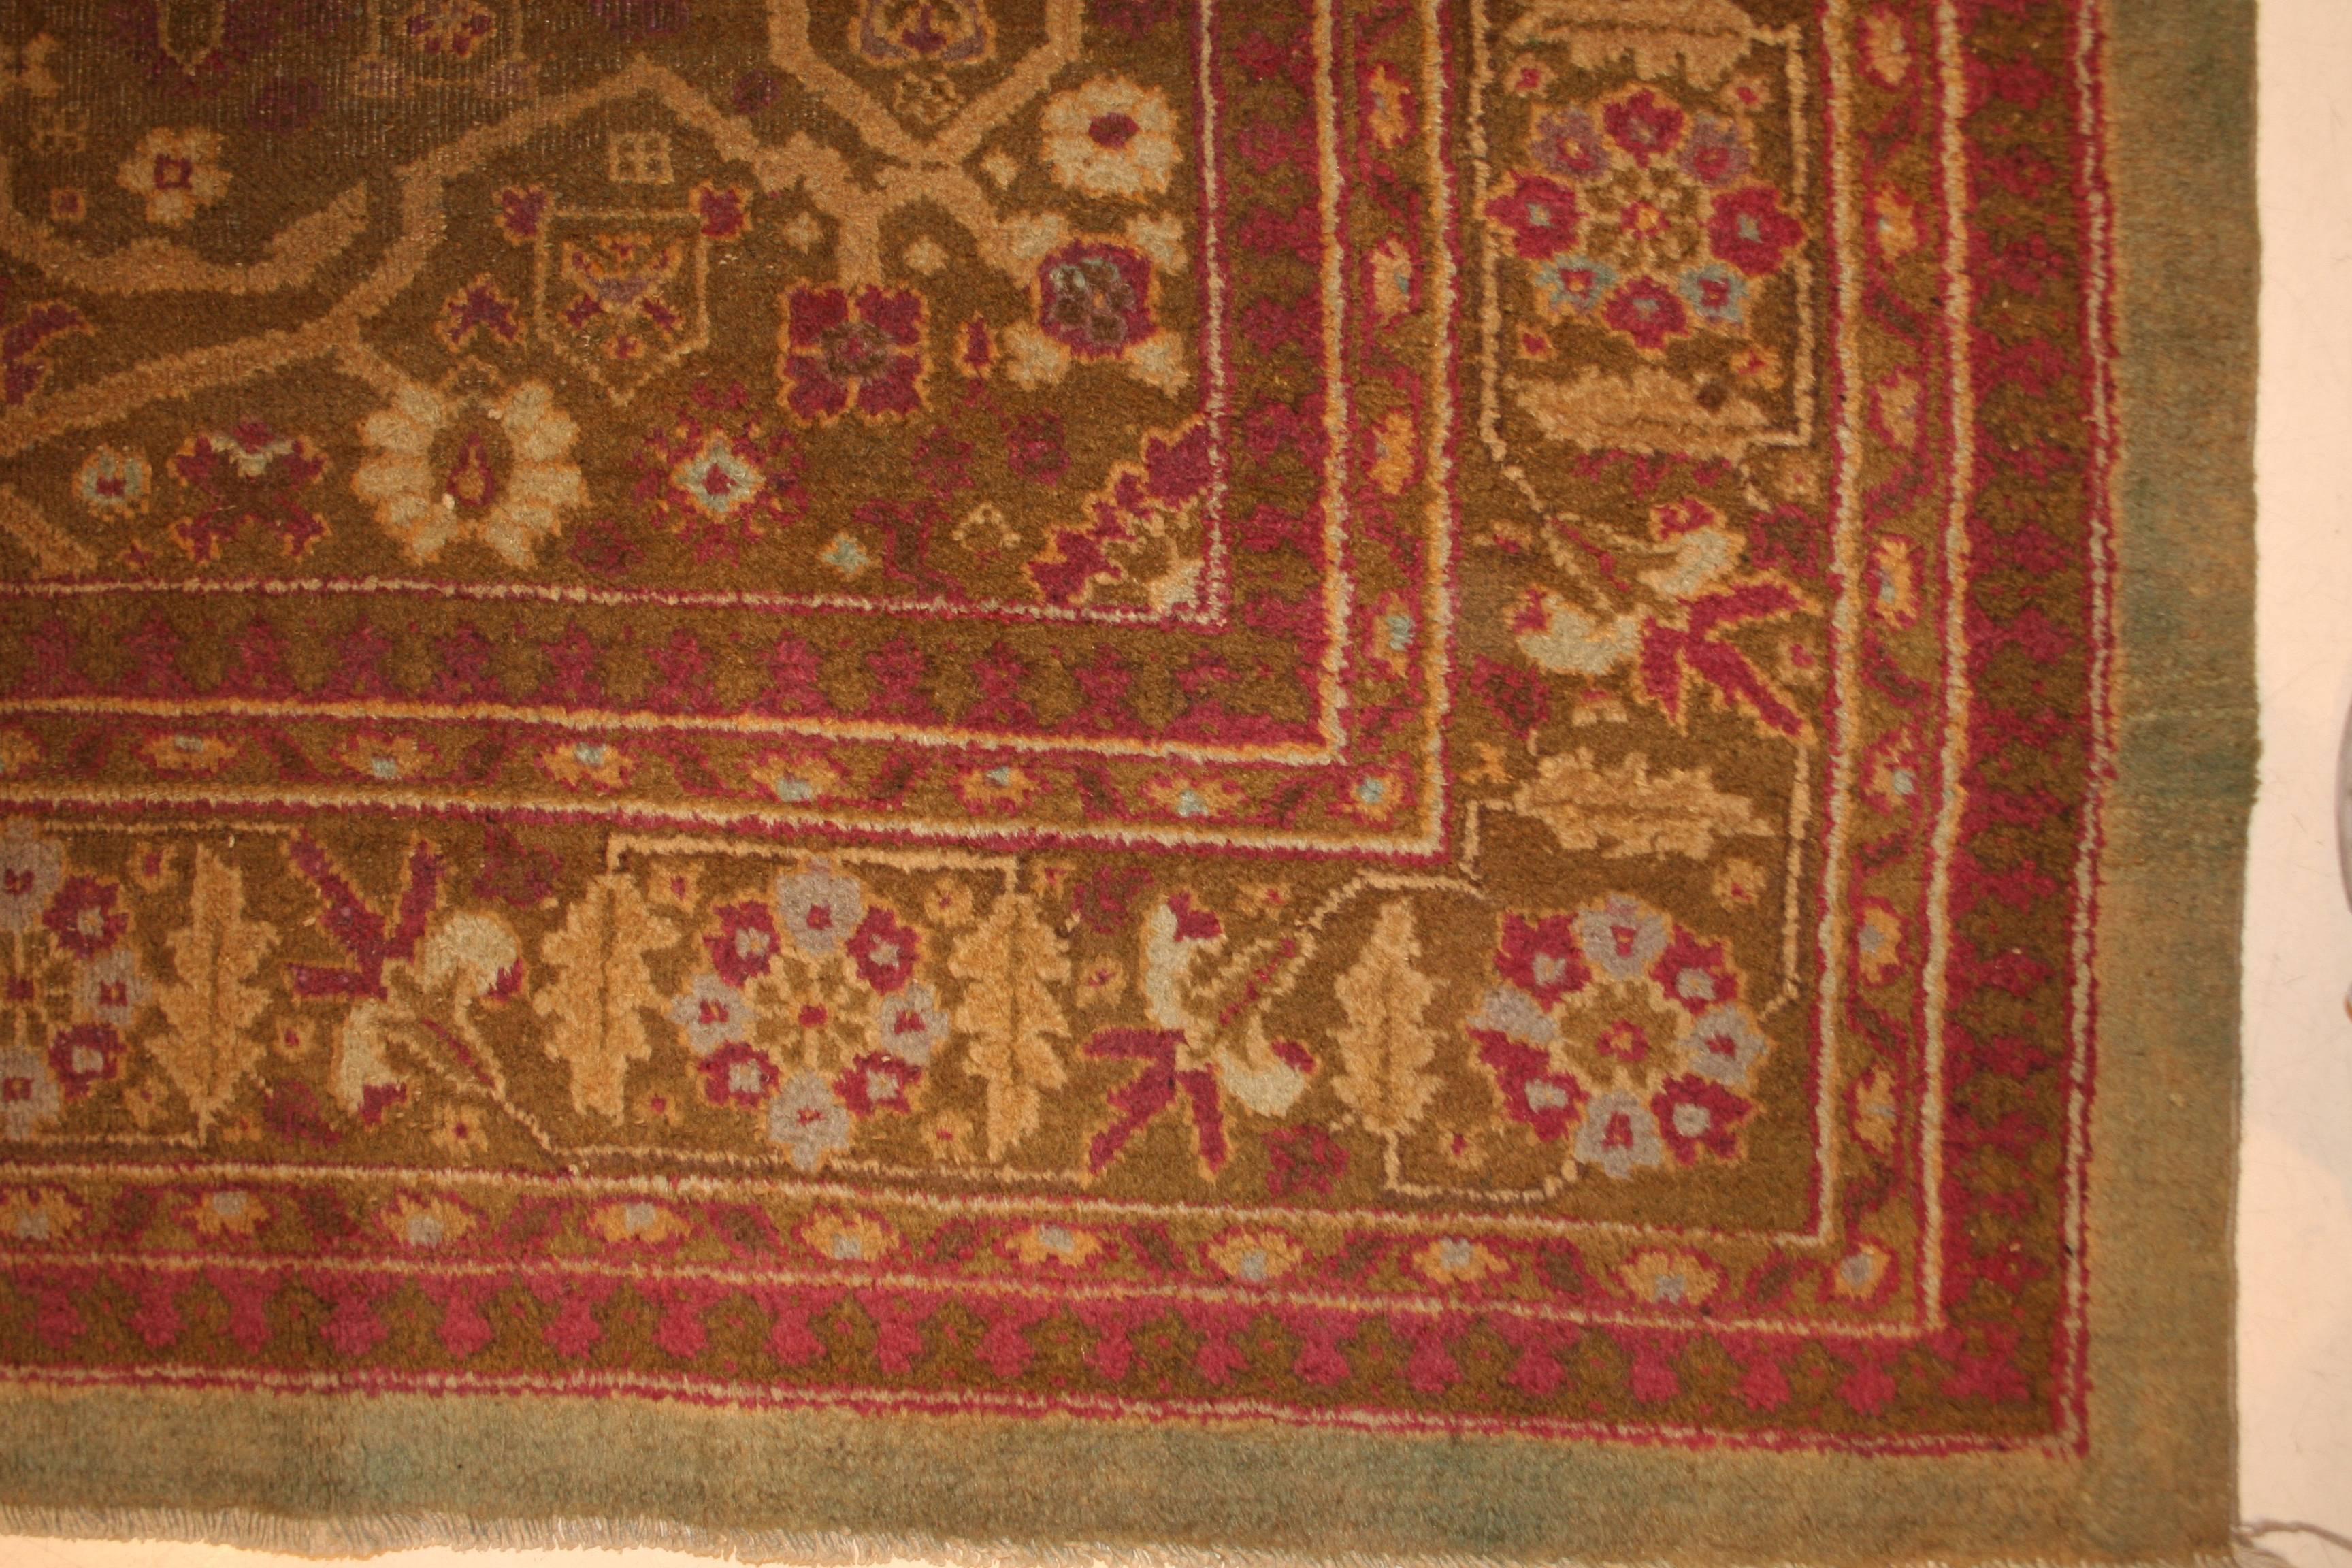 Characterized by a very unusual light green background, this fine Amritsar carpet is distinguished by a small medallion with pendants layered onto a large cartouche acting and an open field. This cartouche is placed over an aubergine background